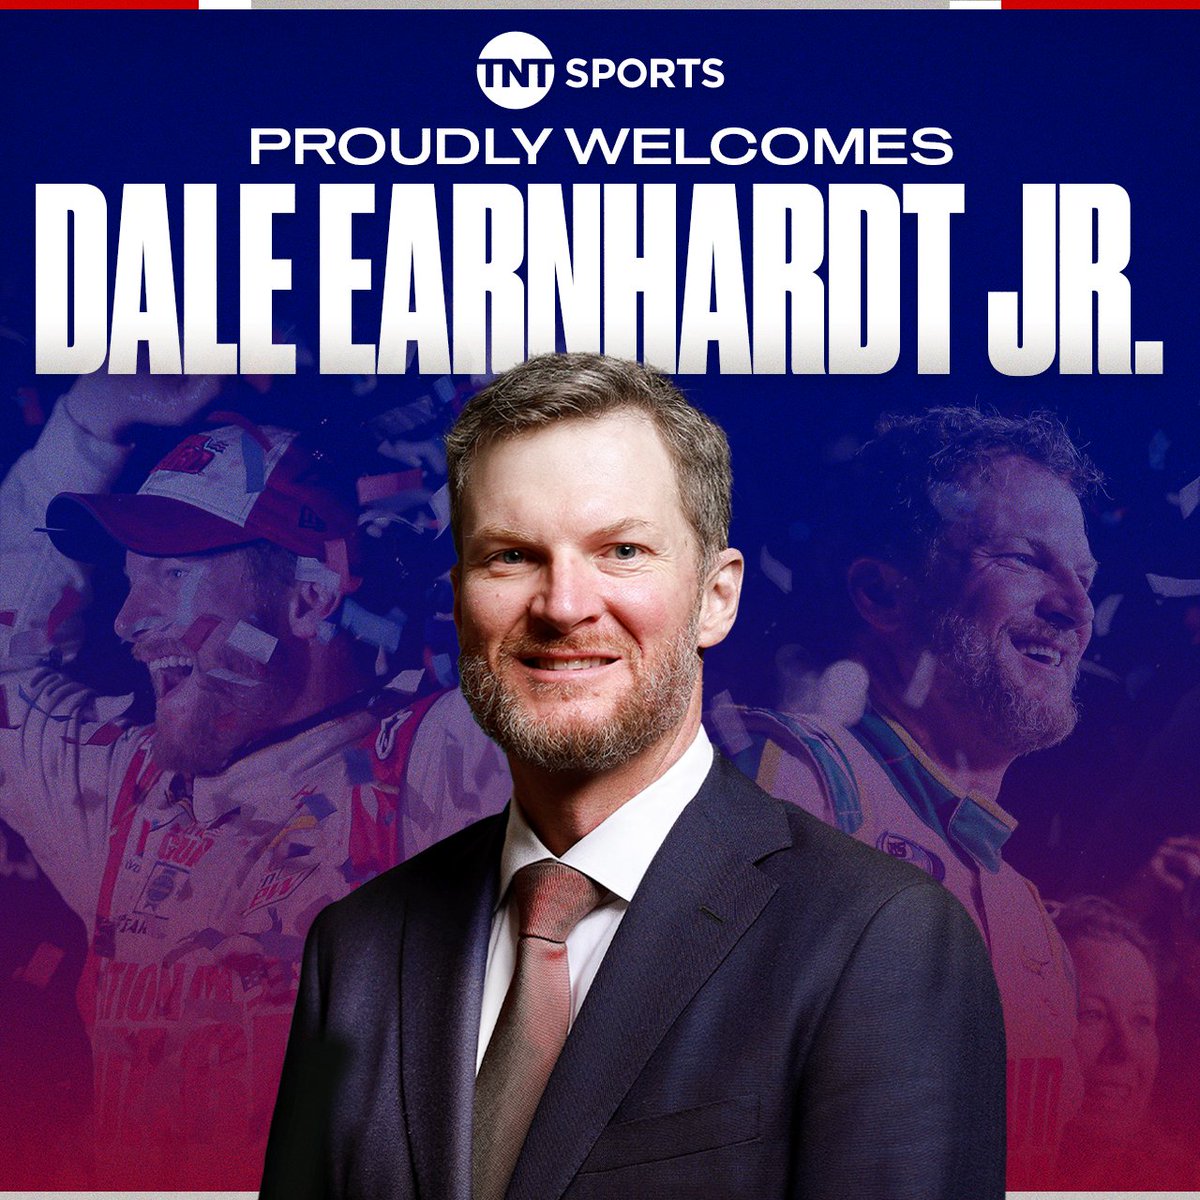 .@PrimeVideo + @WBD today are formally confirming they have signed @DaleJr in separate broadcast deals to become part of their NASCAR booth talent starting in 2025. 🔲 Earnhardt to also participate in a @BleacherReport digital/social content series co-produced by @DirtyMoMedia.